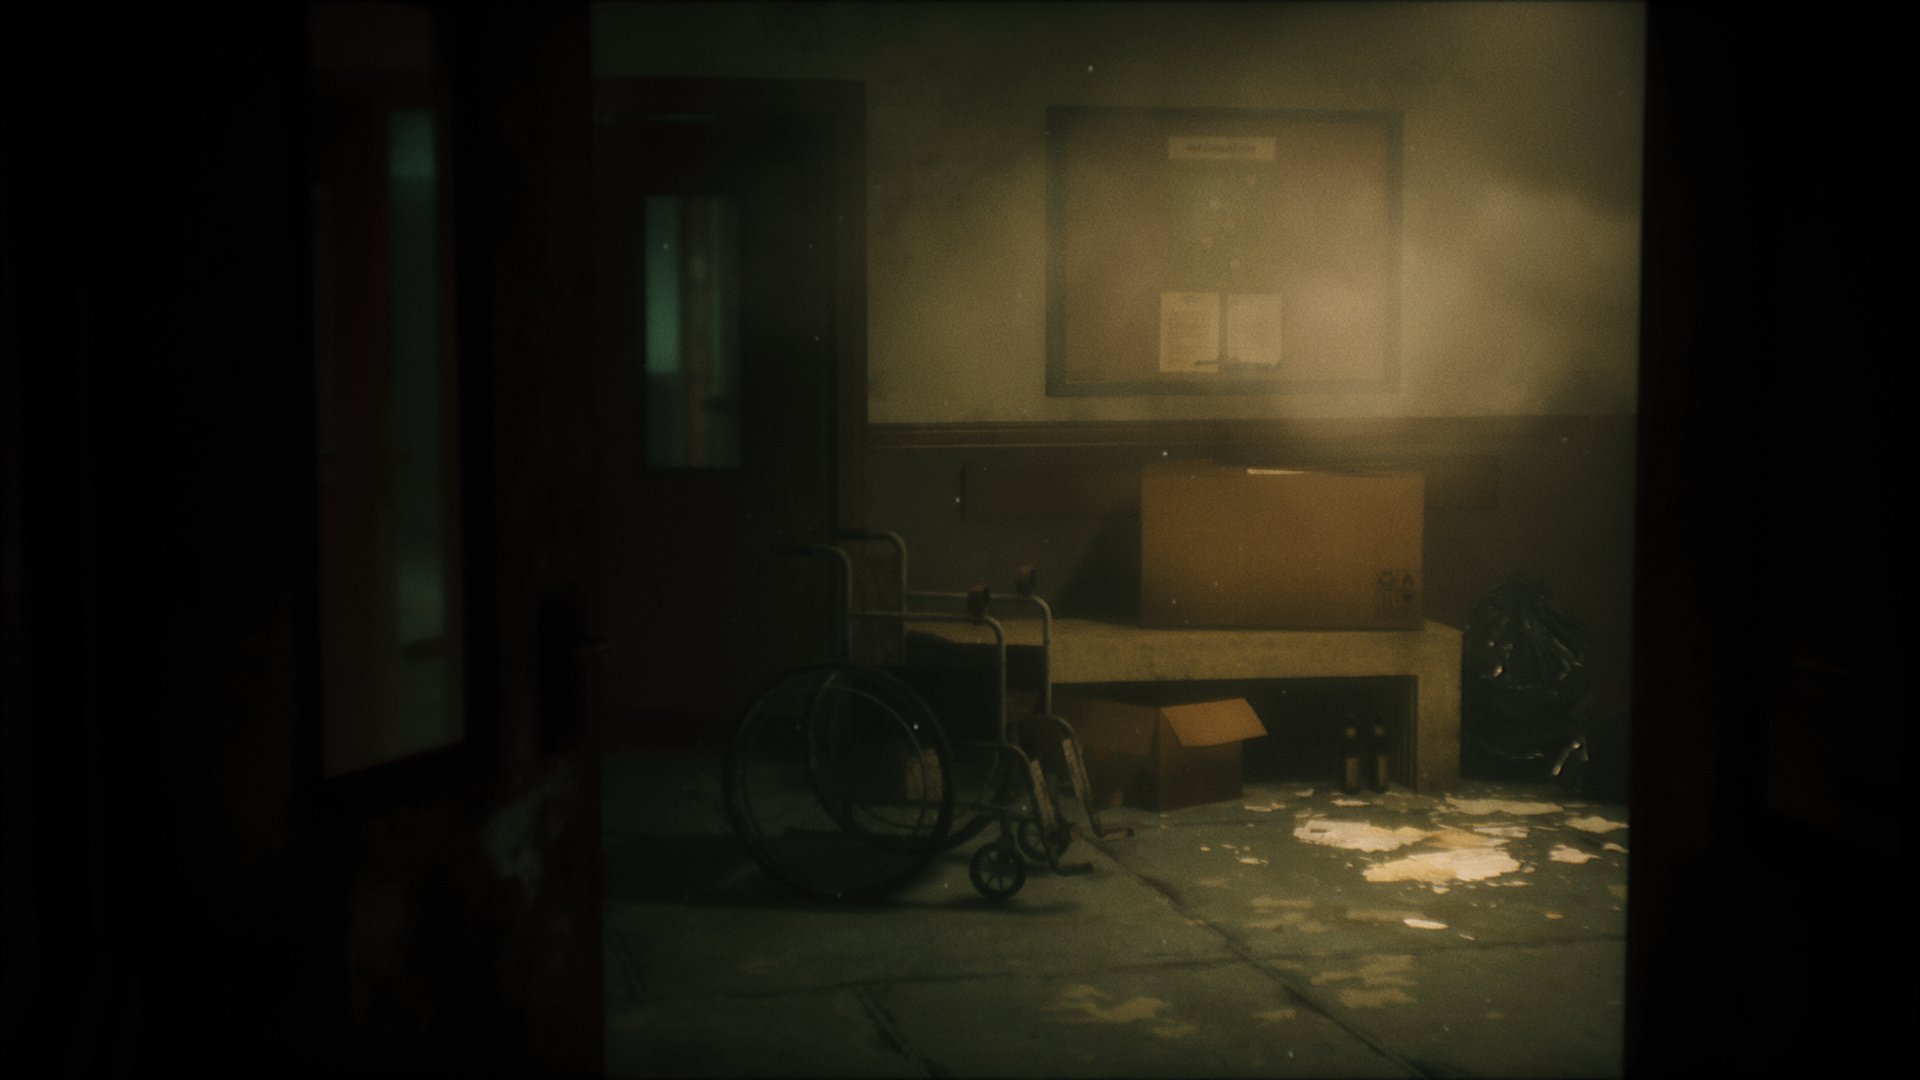 If Pneumata is anything like other survival horror games, nothing good can happen here